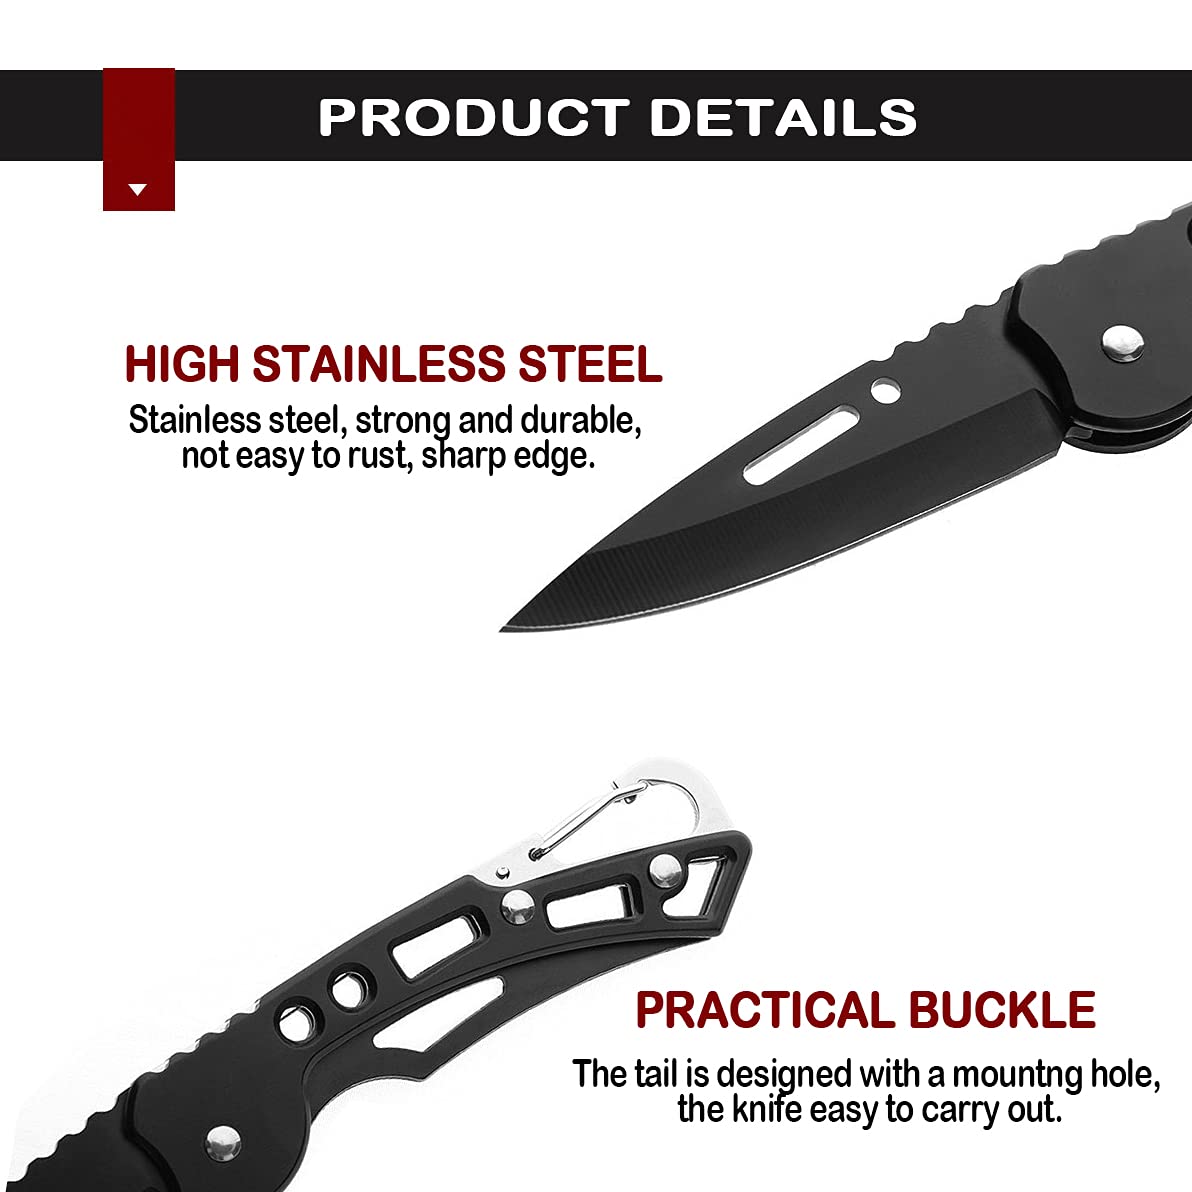 3 PACK Pocket Folding Knife, Tactical Knife, Super Sharp Blade only 2.5 inch, Good for Camping Survival Indoor and Outdoor Activities, Easy-to-Carry, Mens Gift